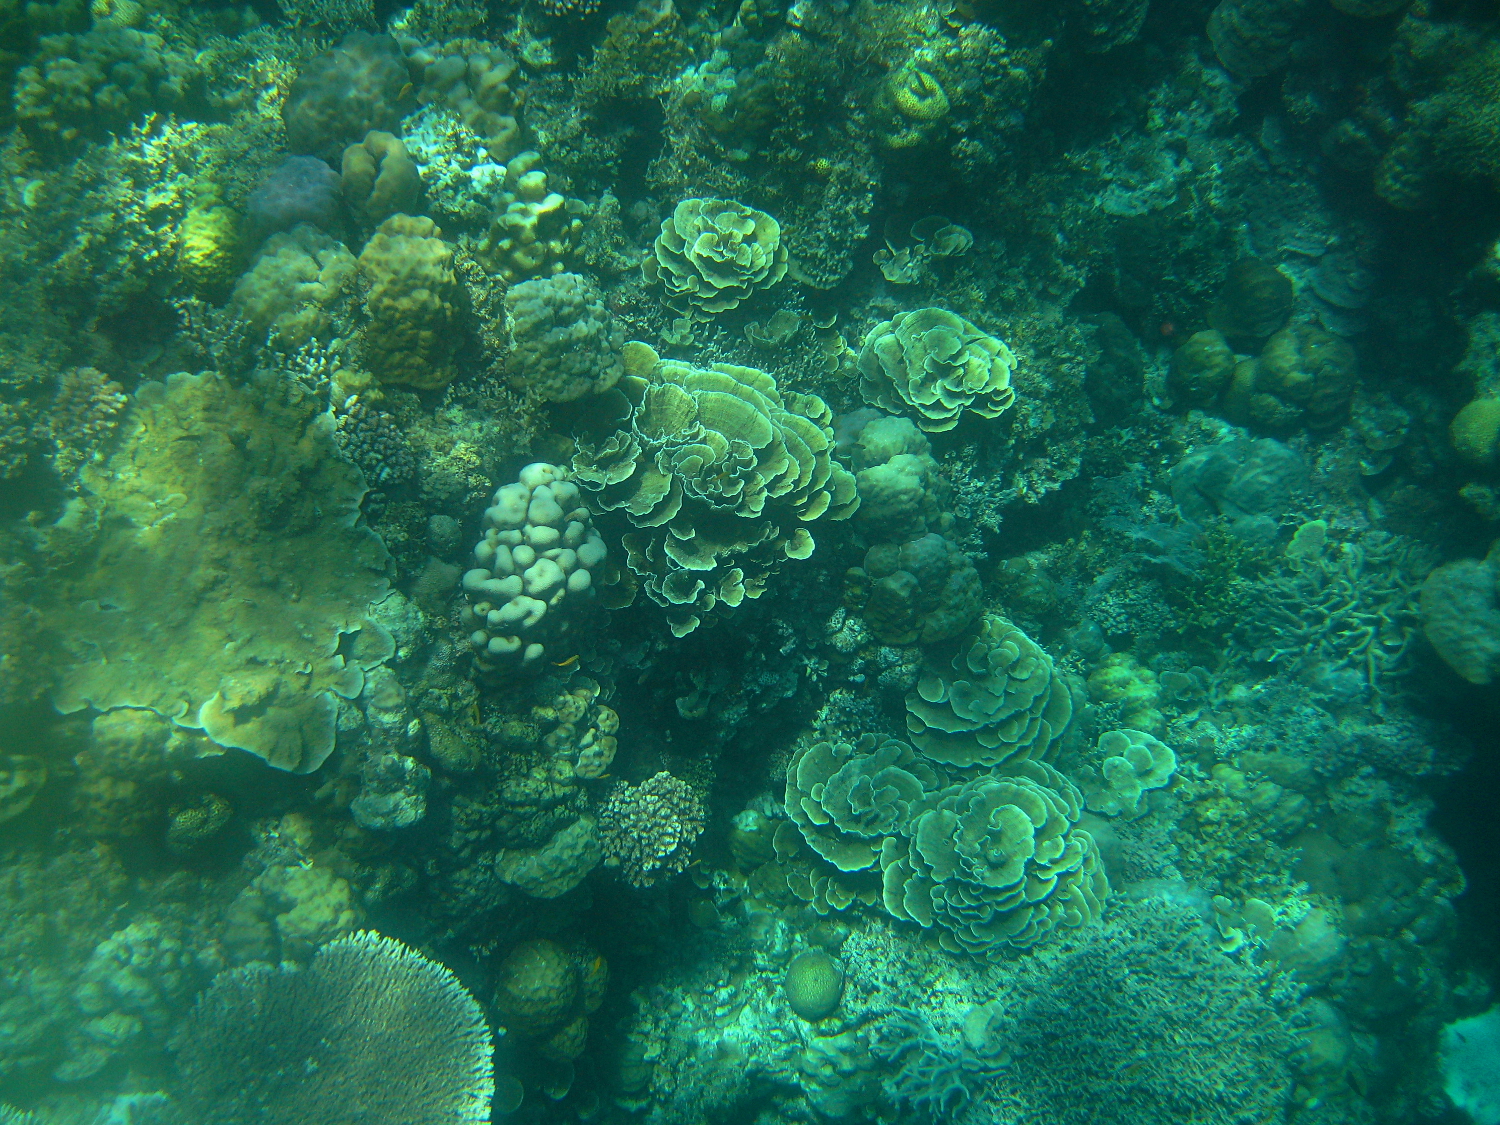 These artificial reefs are combating coral degradation